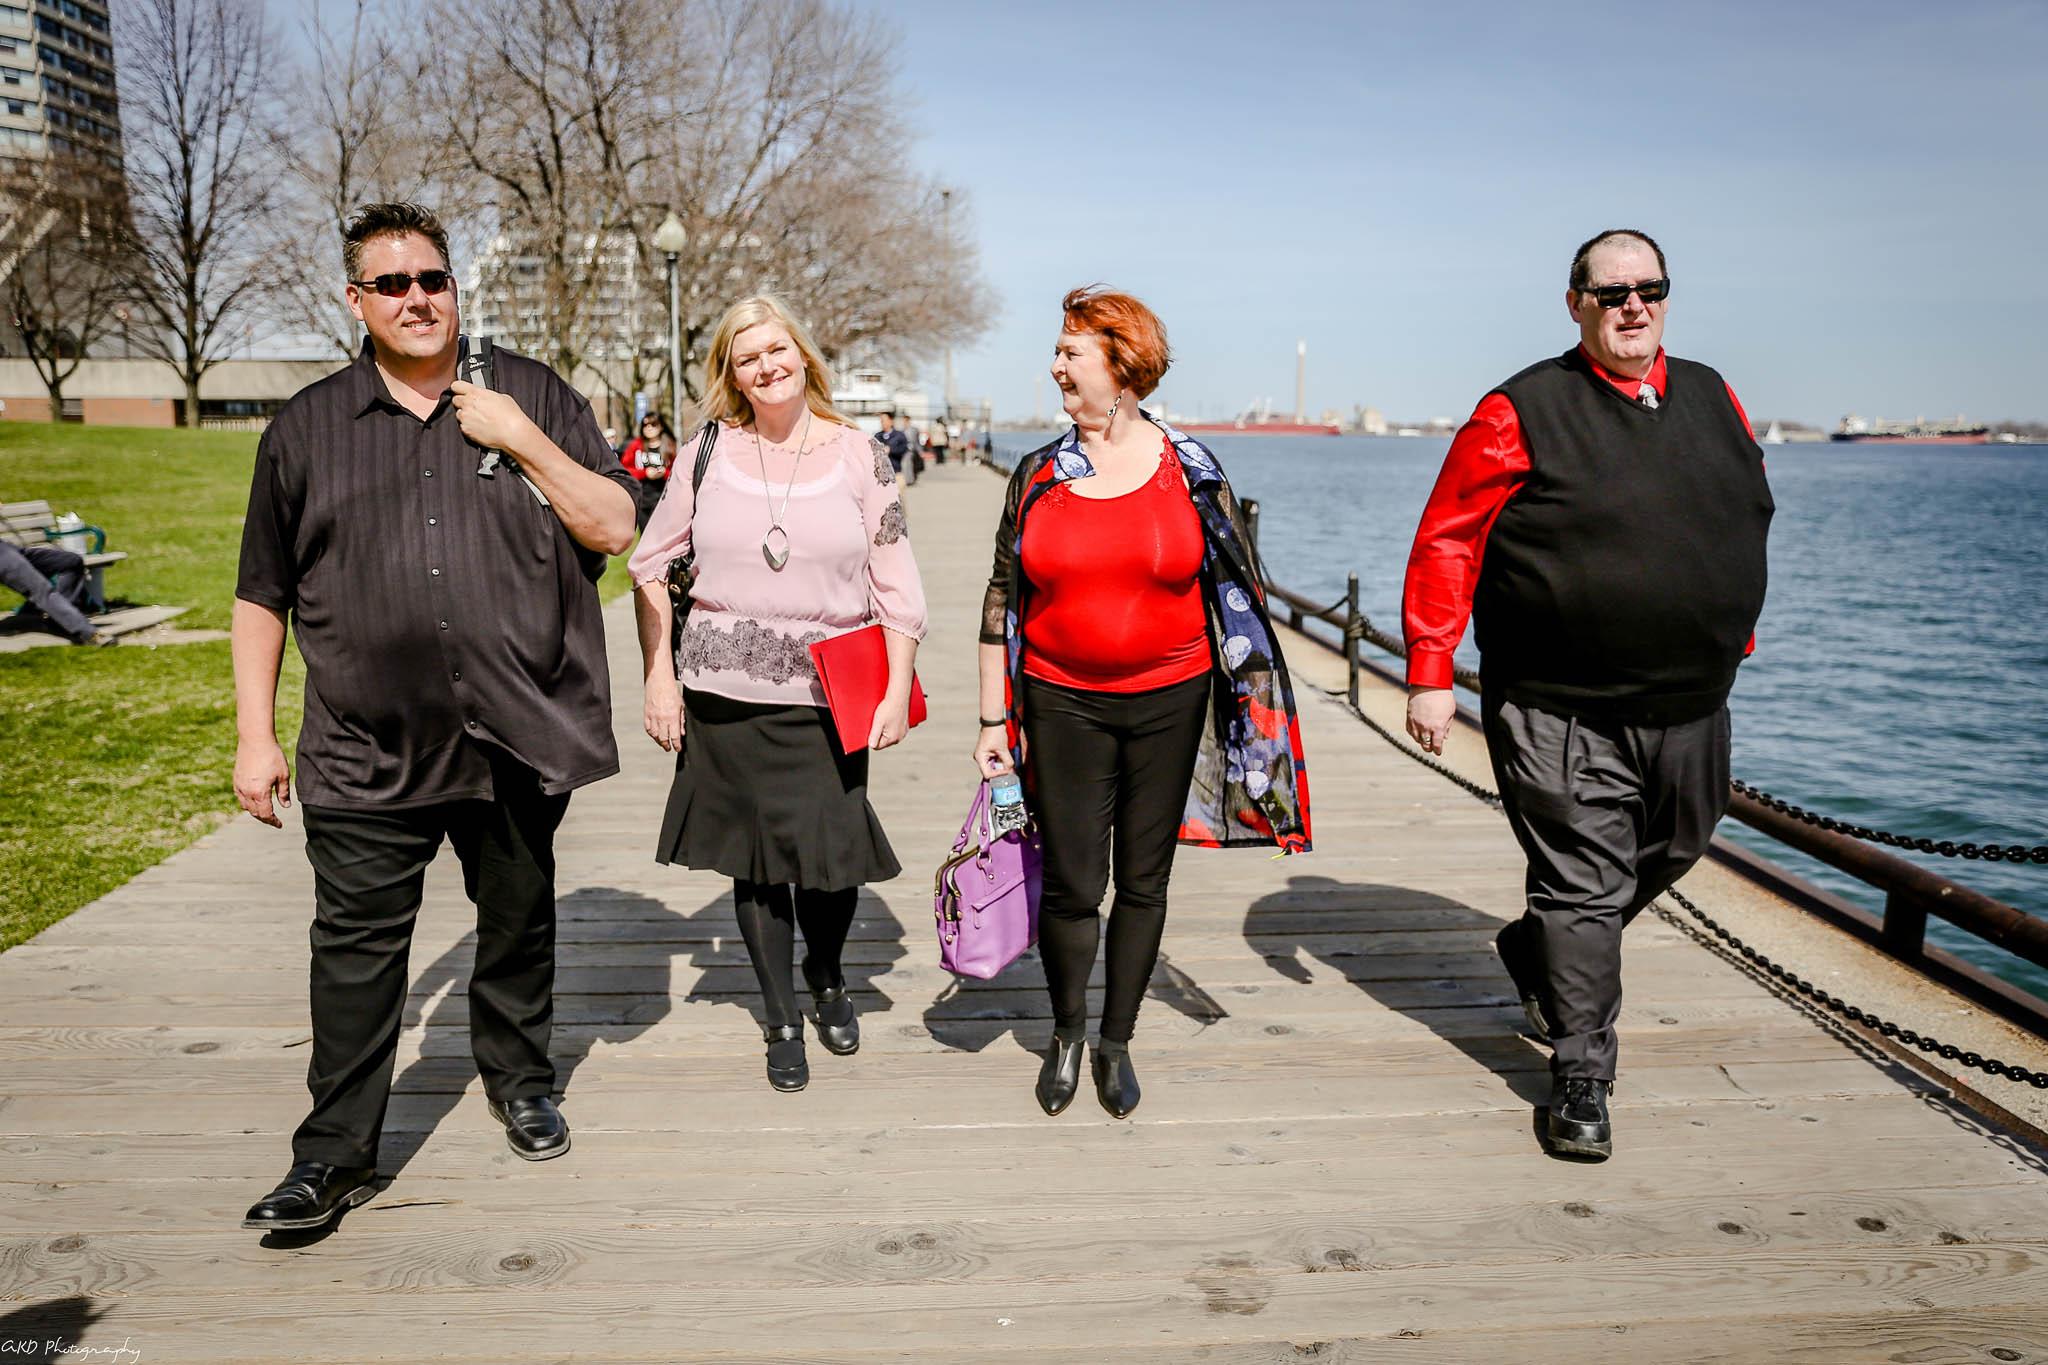 Two adult males and two adult females with obesity are walking outside, smiling and conversing with each other.